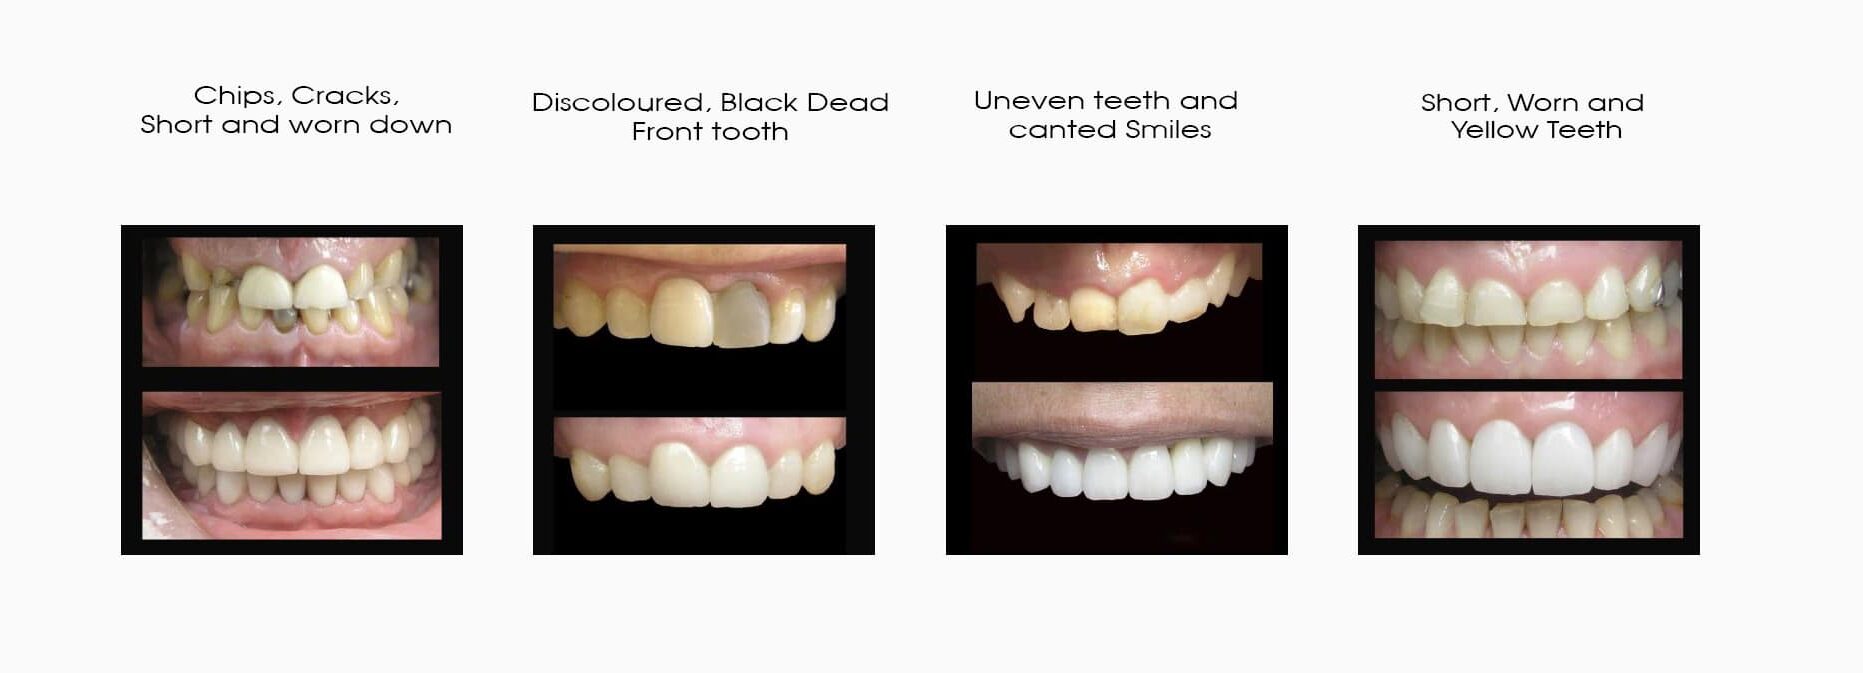 General & Cosmetic Dentistry Clinic - Best Cosmetic Dentist in Melbourne